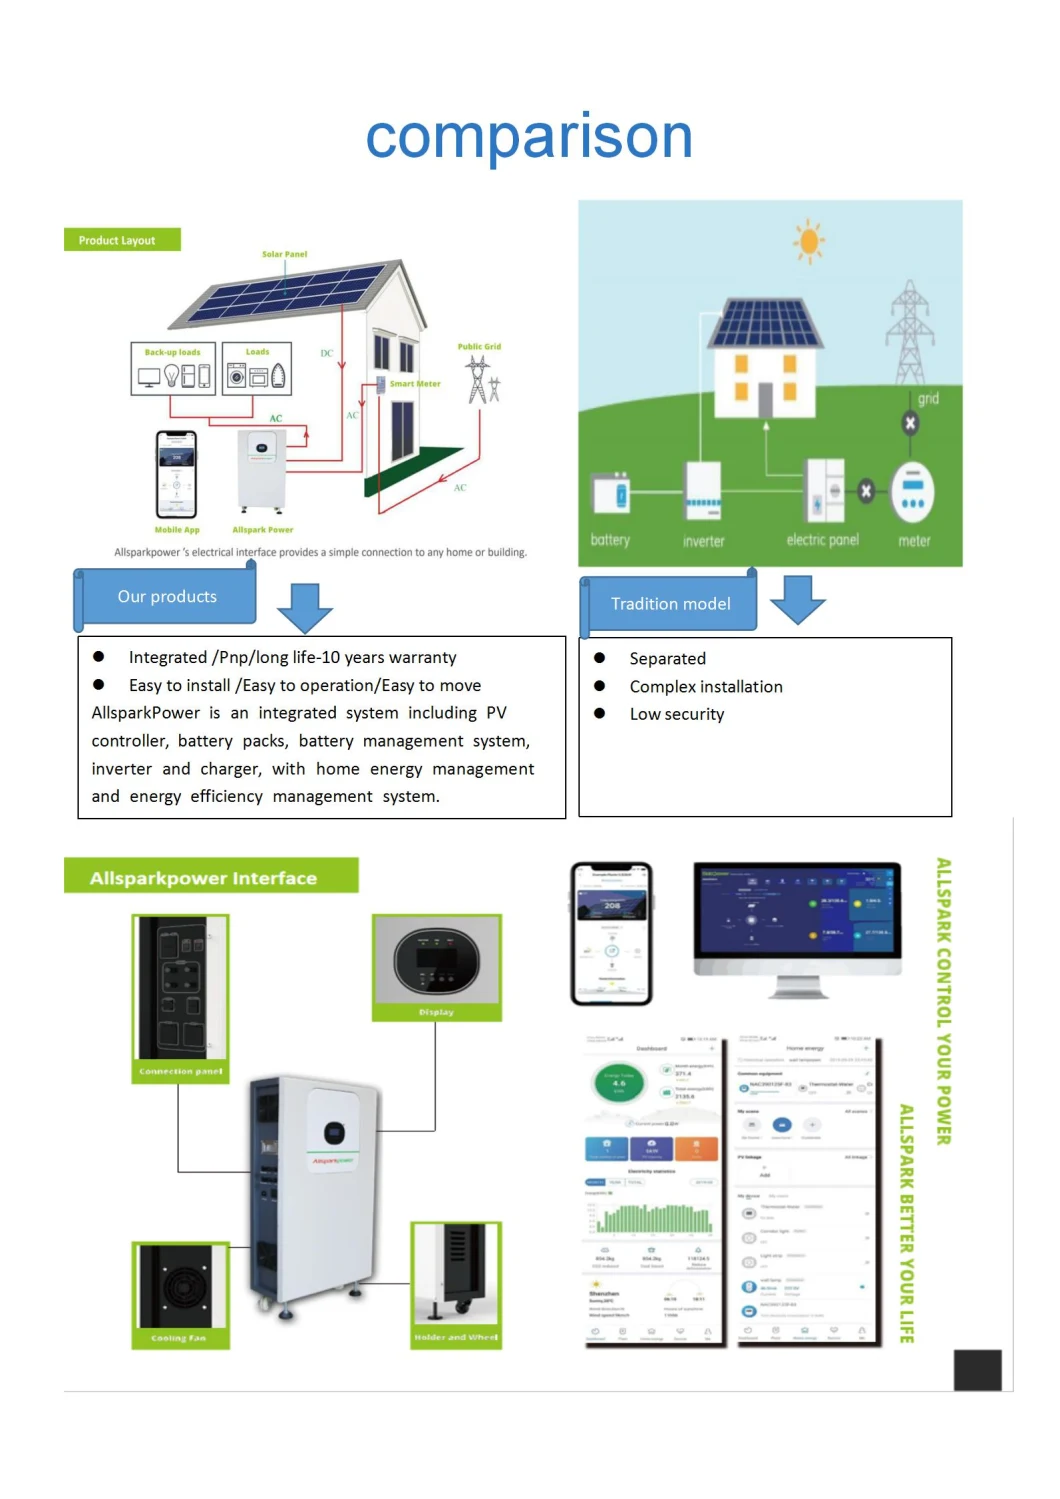 3kw 5kw Home Green Energy Storage Solar System with MPPT Inside